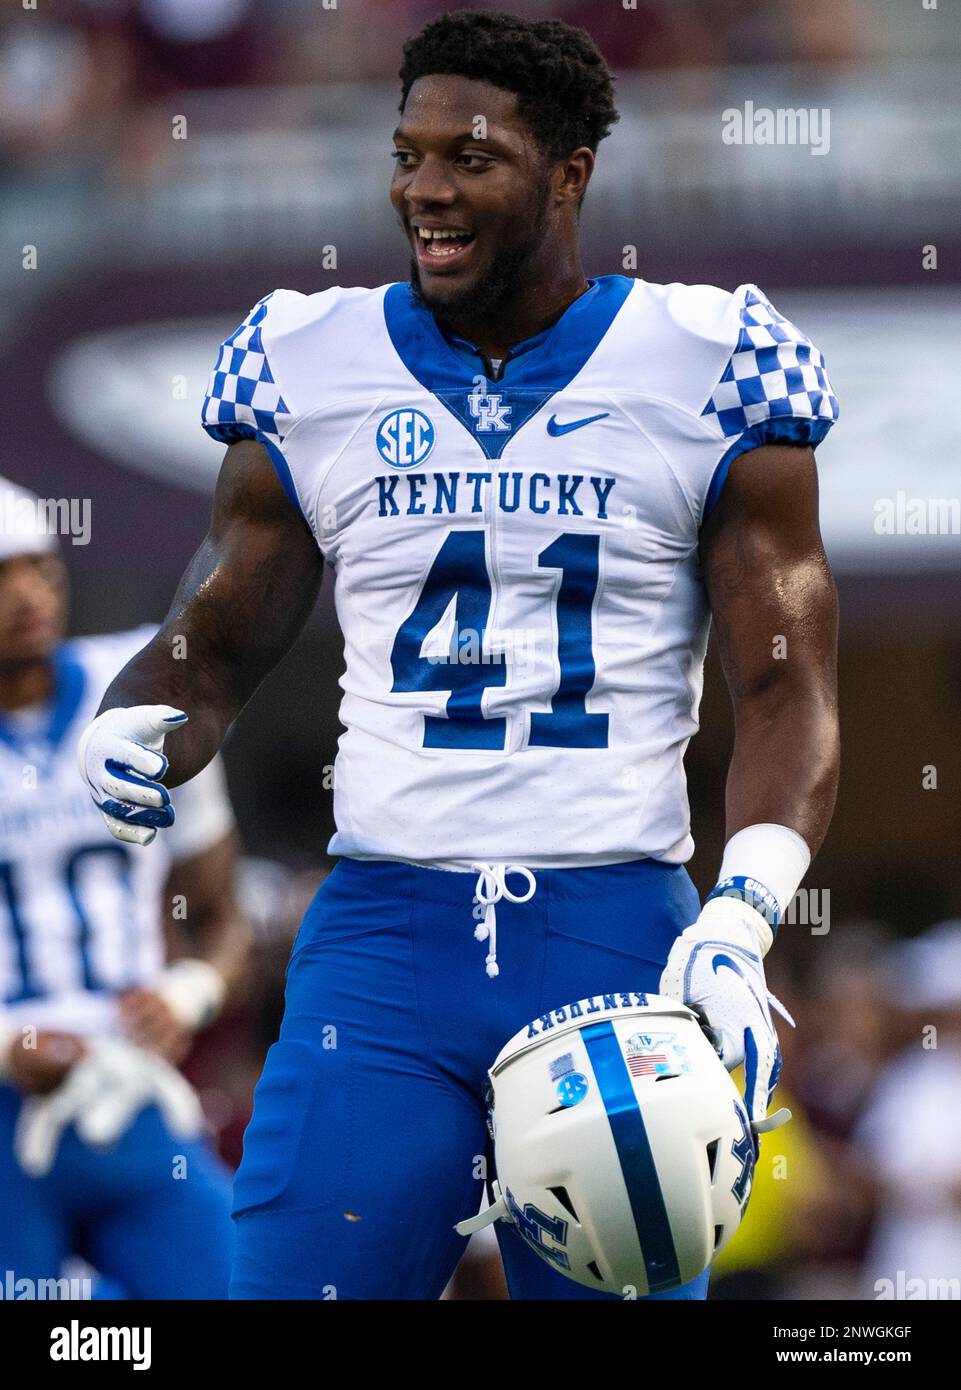 Kentucky linebacker Josh Allen (41) before a game against Texas A&M. Saturday, October 6, 2018 in College Station, Tex. (TFV Media via AP) Stock Photo